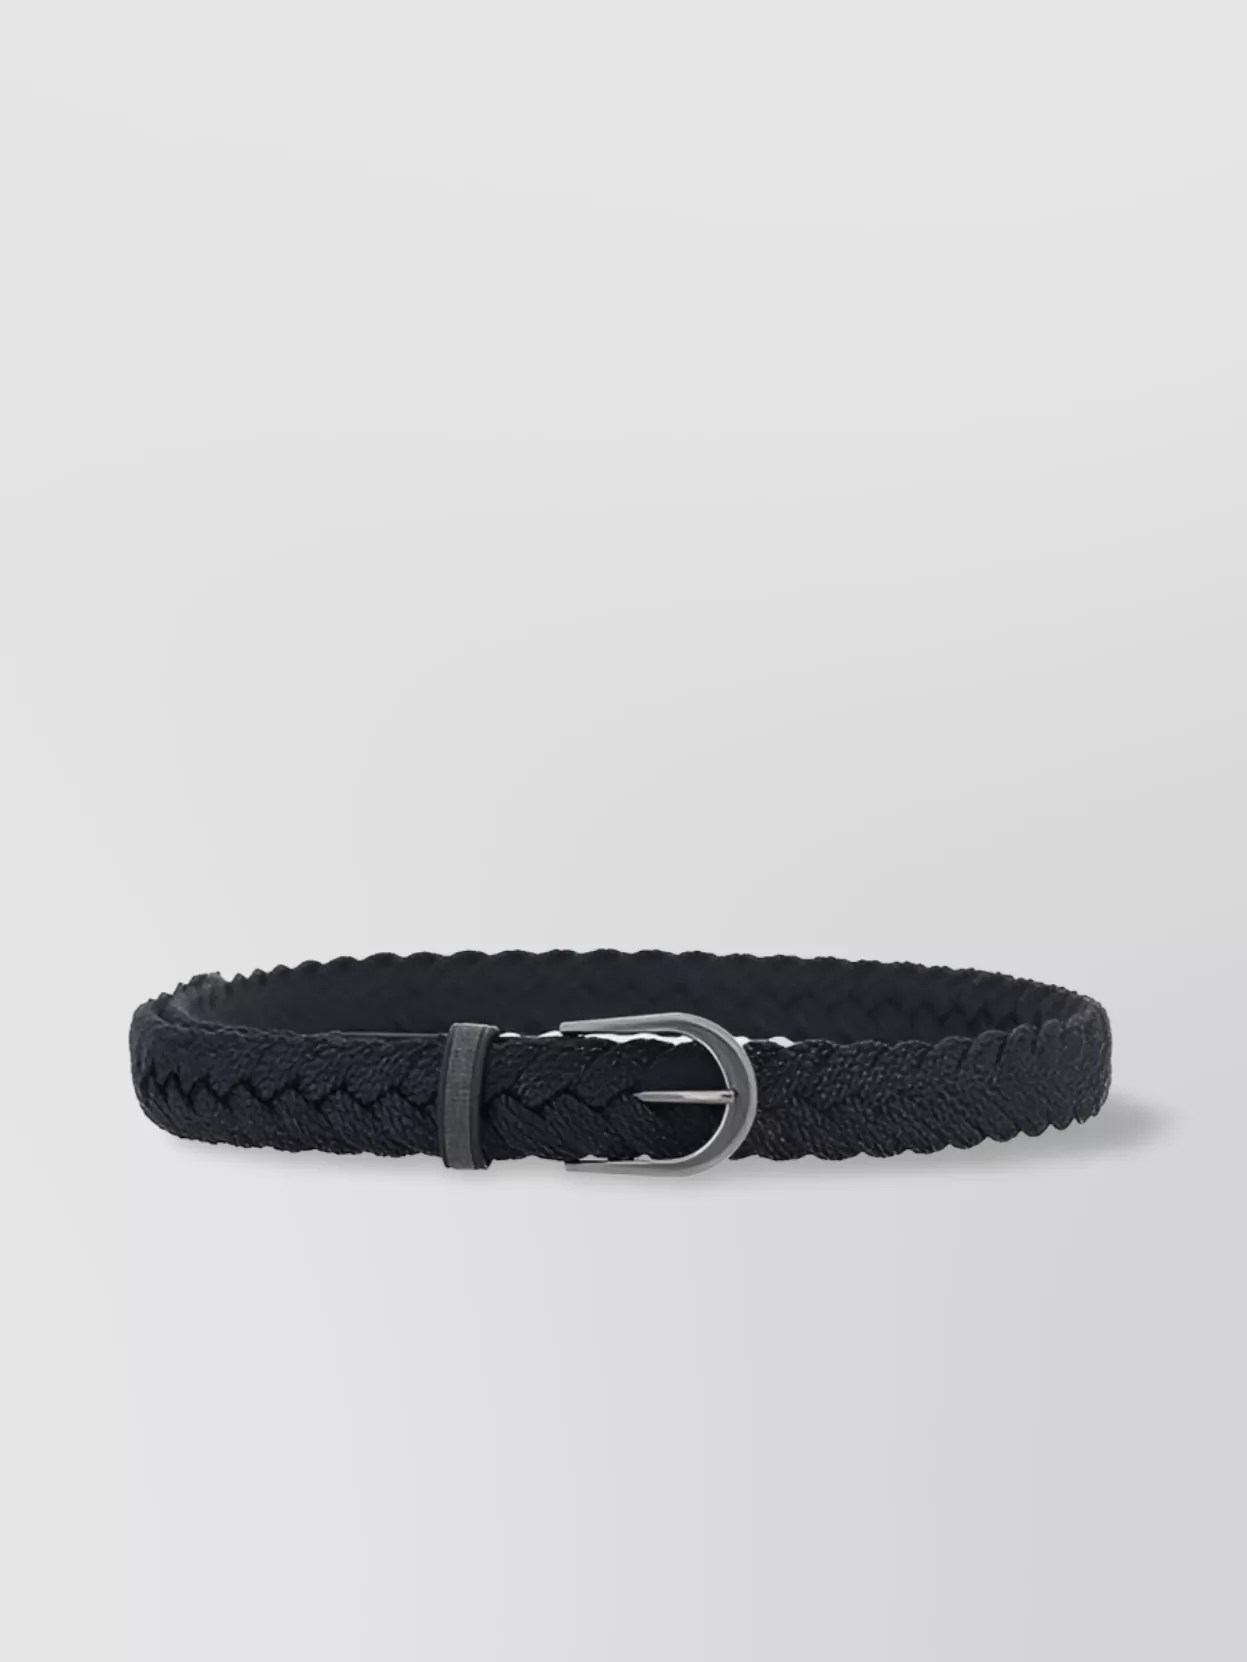 Brunello Cucinelli Leather Belt Featuring Braided Design And Jewel Detail In Black